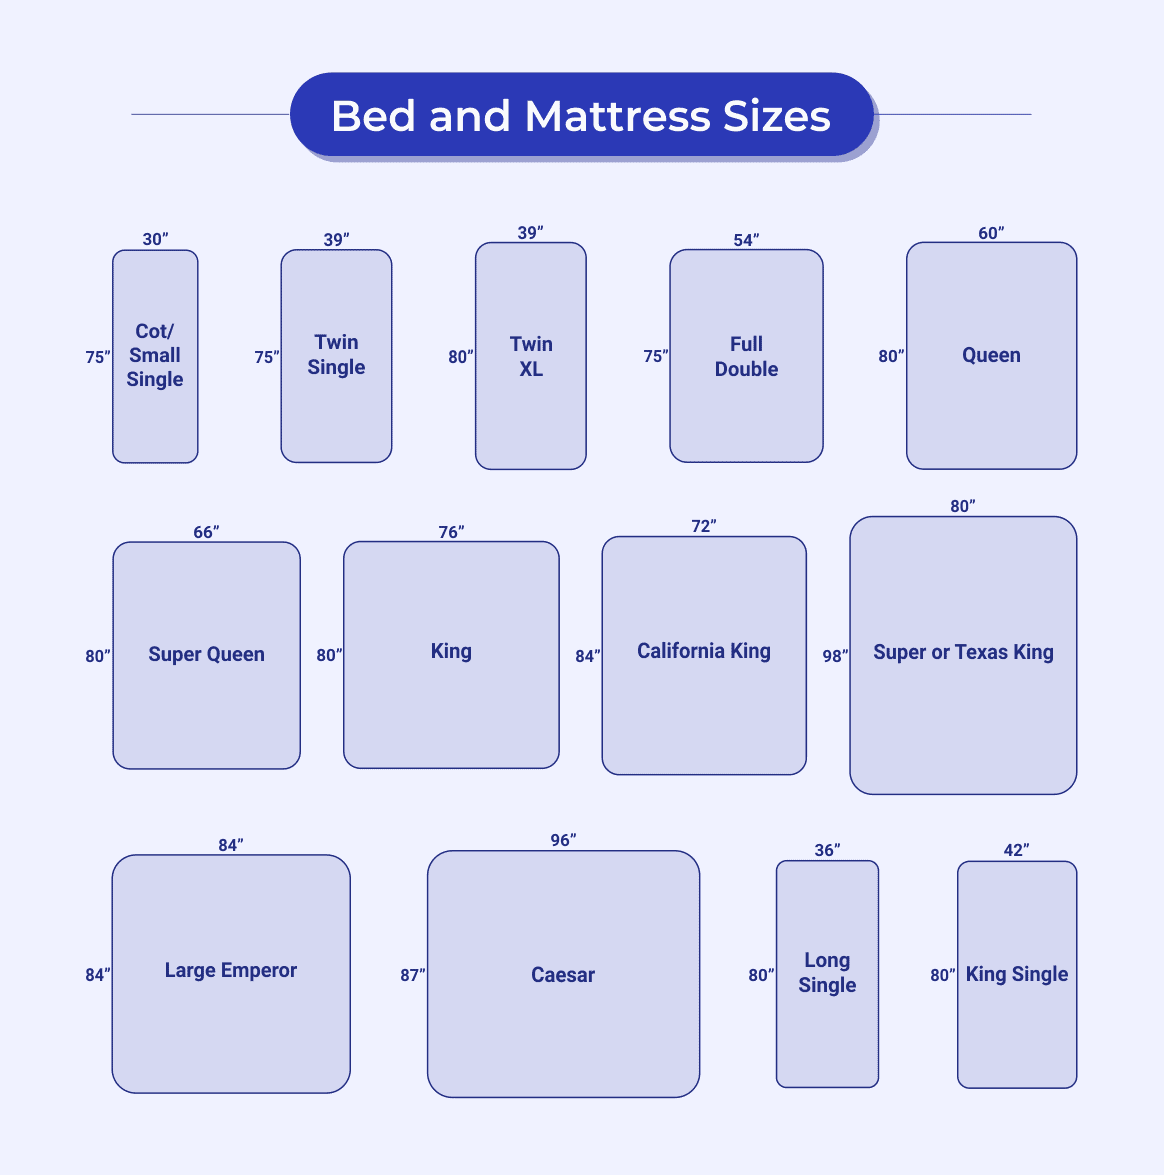 Mattress And Bed Sizes What Are The, How Wide Is A Super King Bed In Feet And Inches